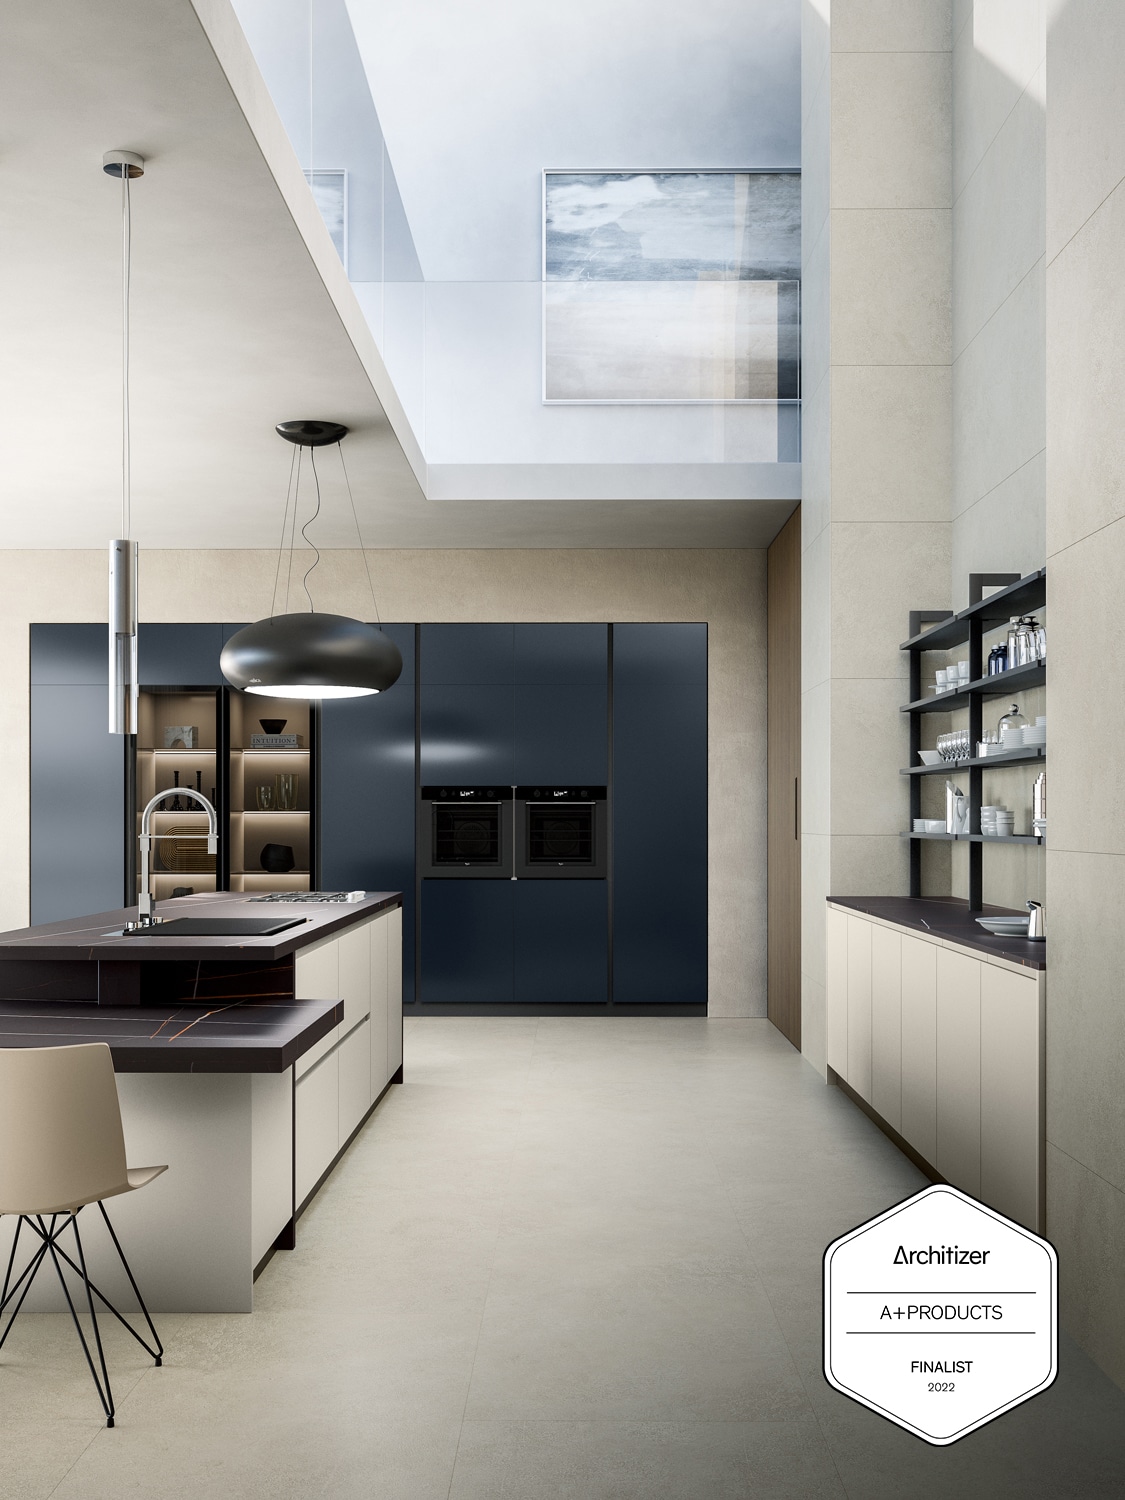 Finalist, Architizer's 2022 A+Product Awards. Modern Yota kitchen design in Talco and Blu Petrolio micalized lacquer.